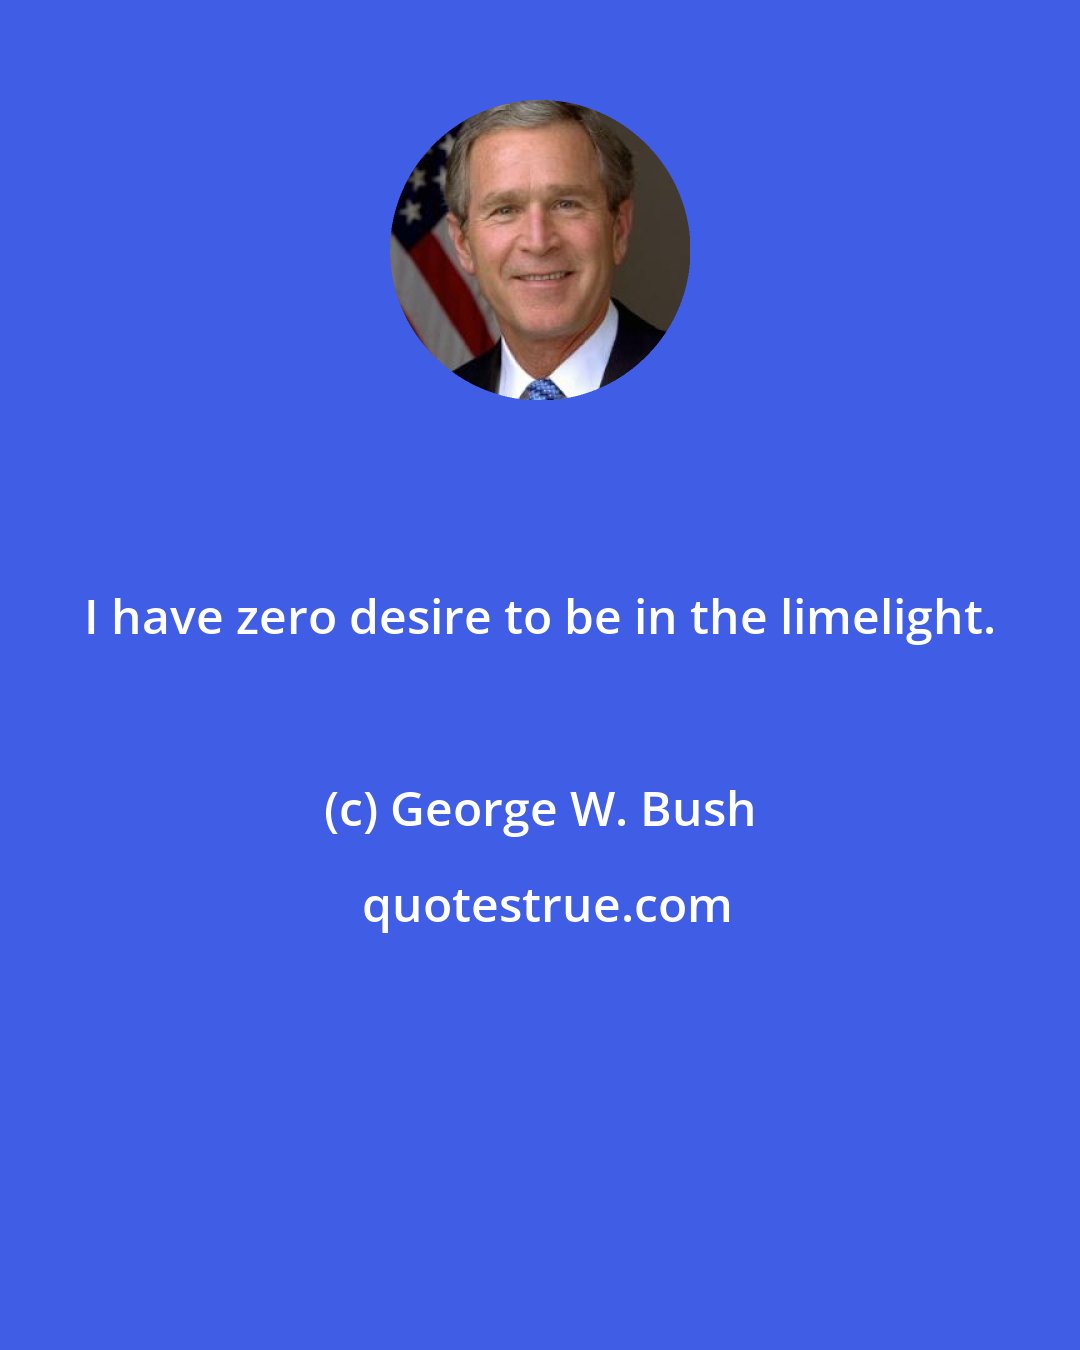 George W. Bush: I have zero desire to be in the limelight.